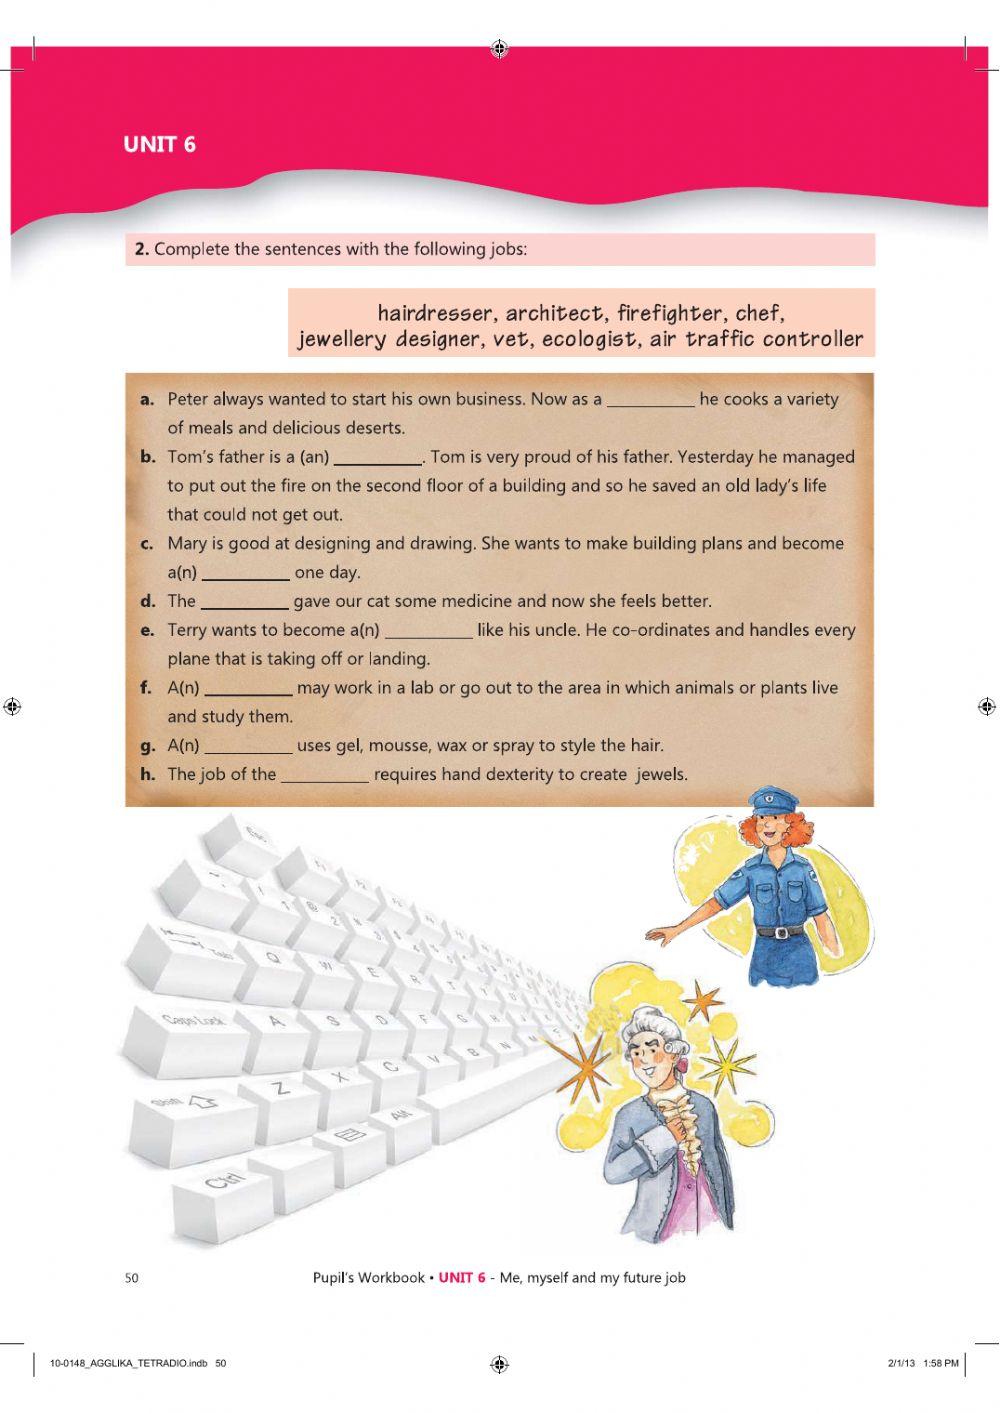 6th grade Unit 6 - Career - Workbook pages 50-51